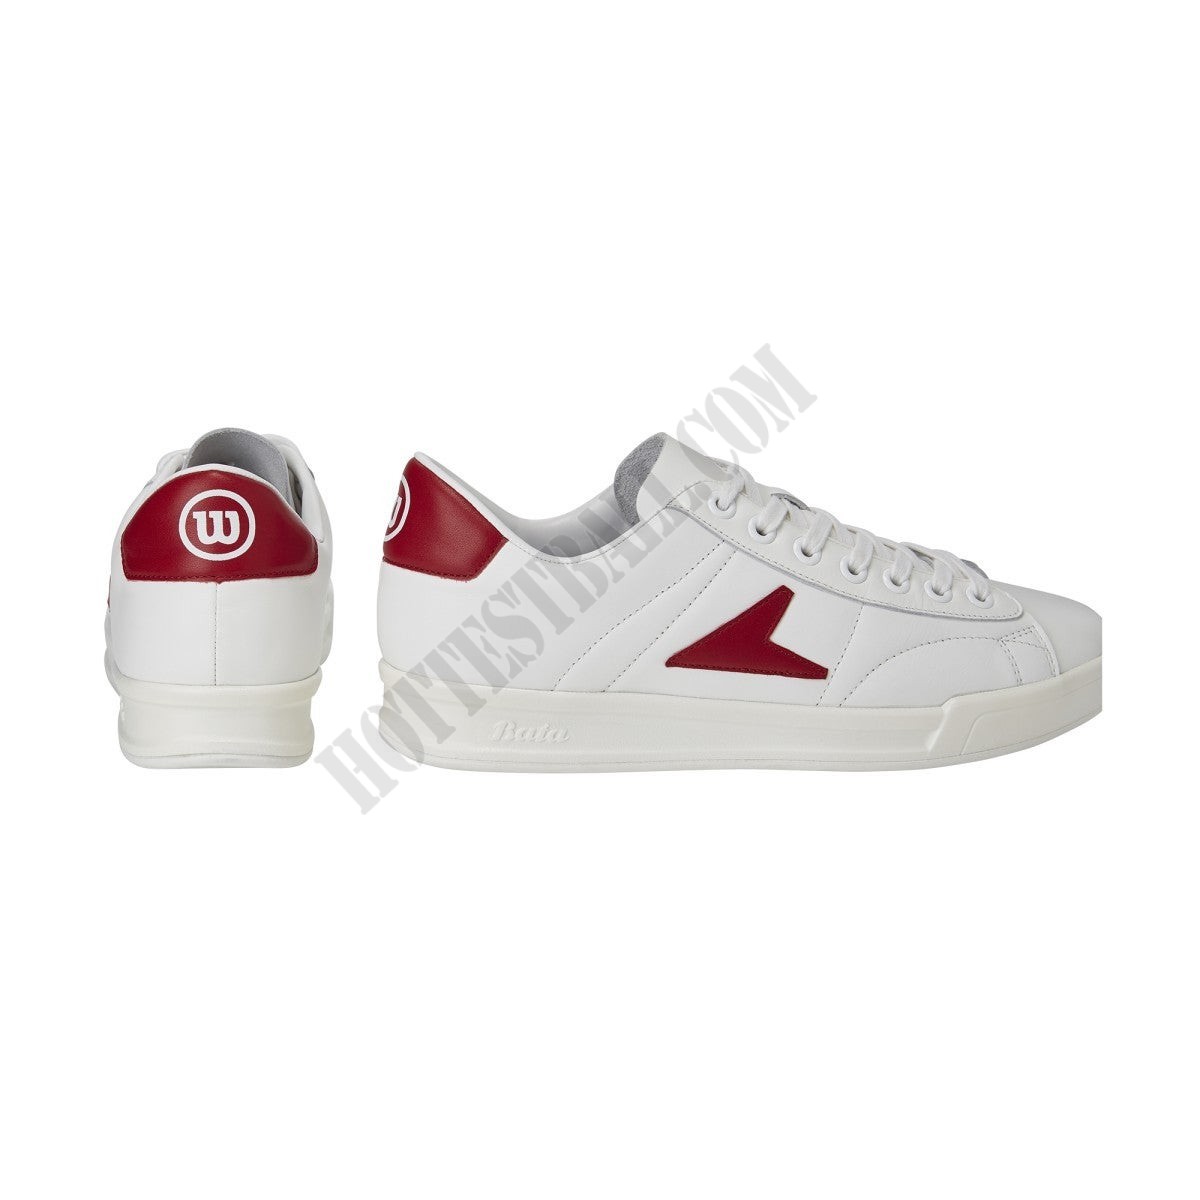 John Wooden Classic Low Top Shoes - Wilson Discount Store - -4